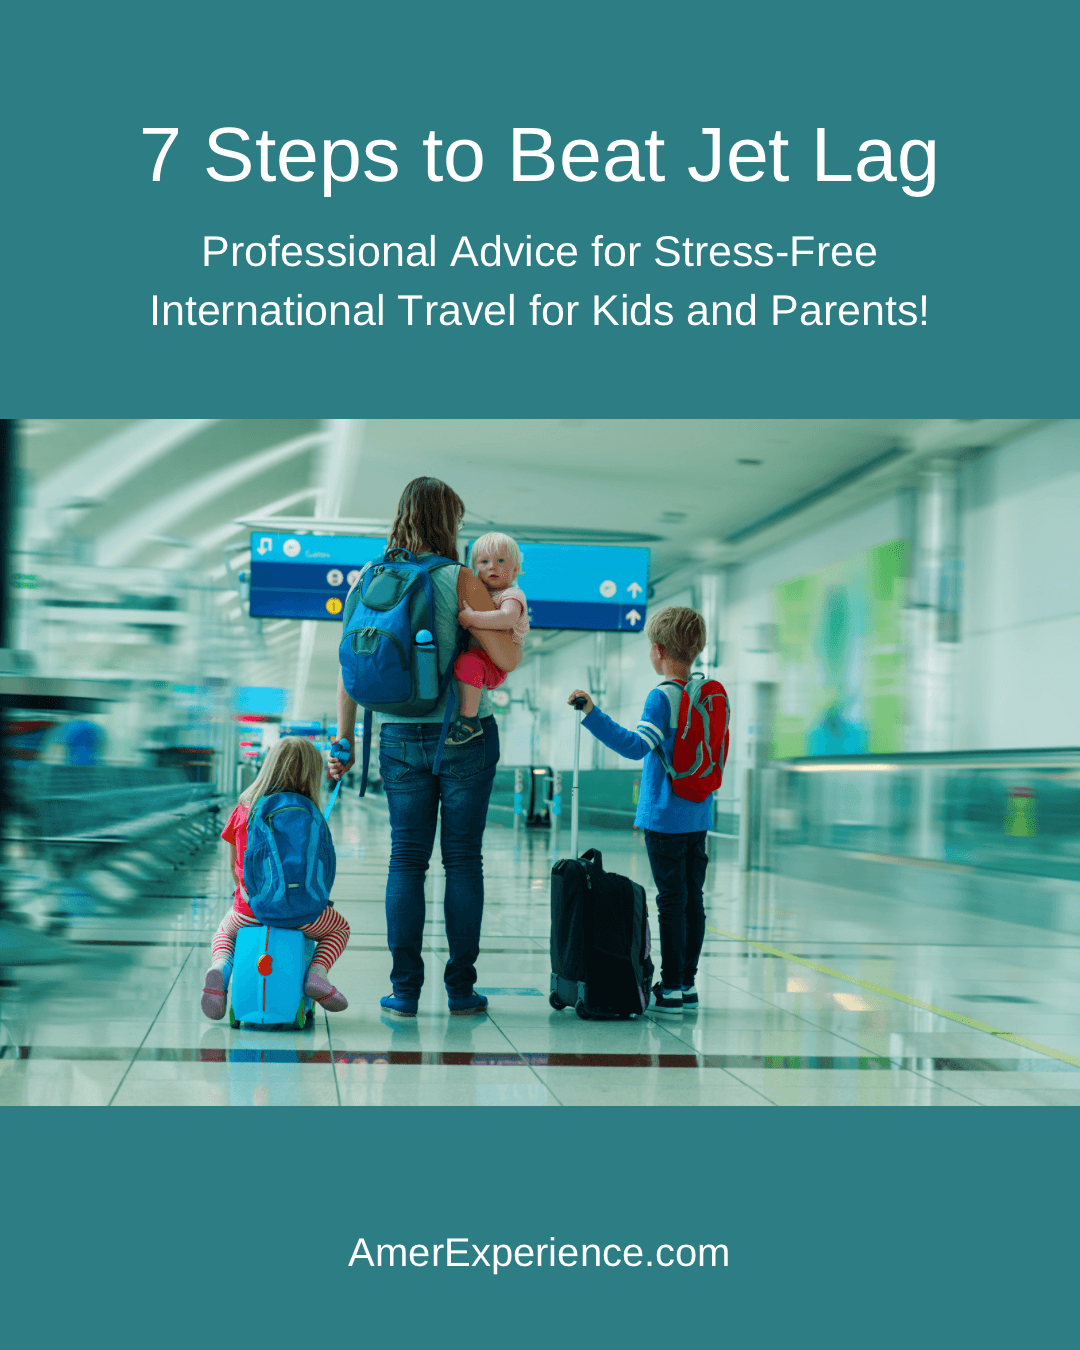 7 Steps to Beat Jet Lag - Travel and Golf Influencer - AmerExperience Content Curator